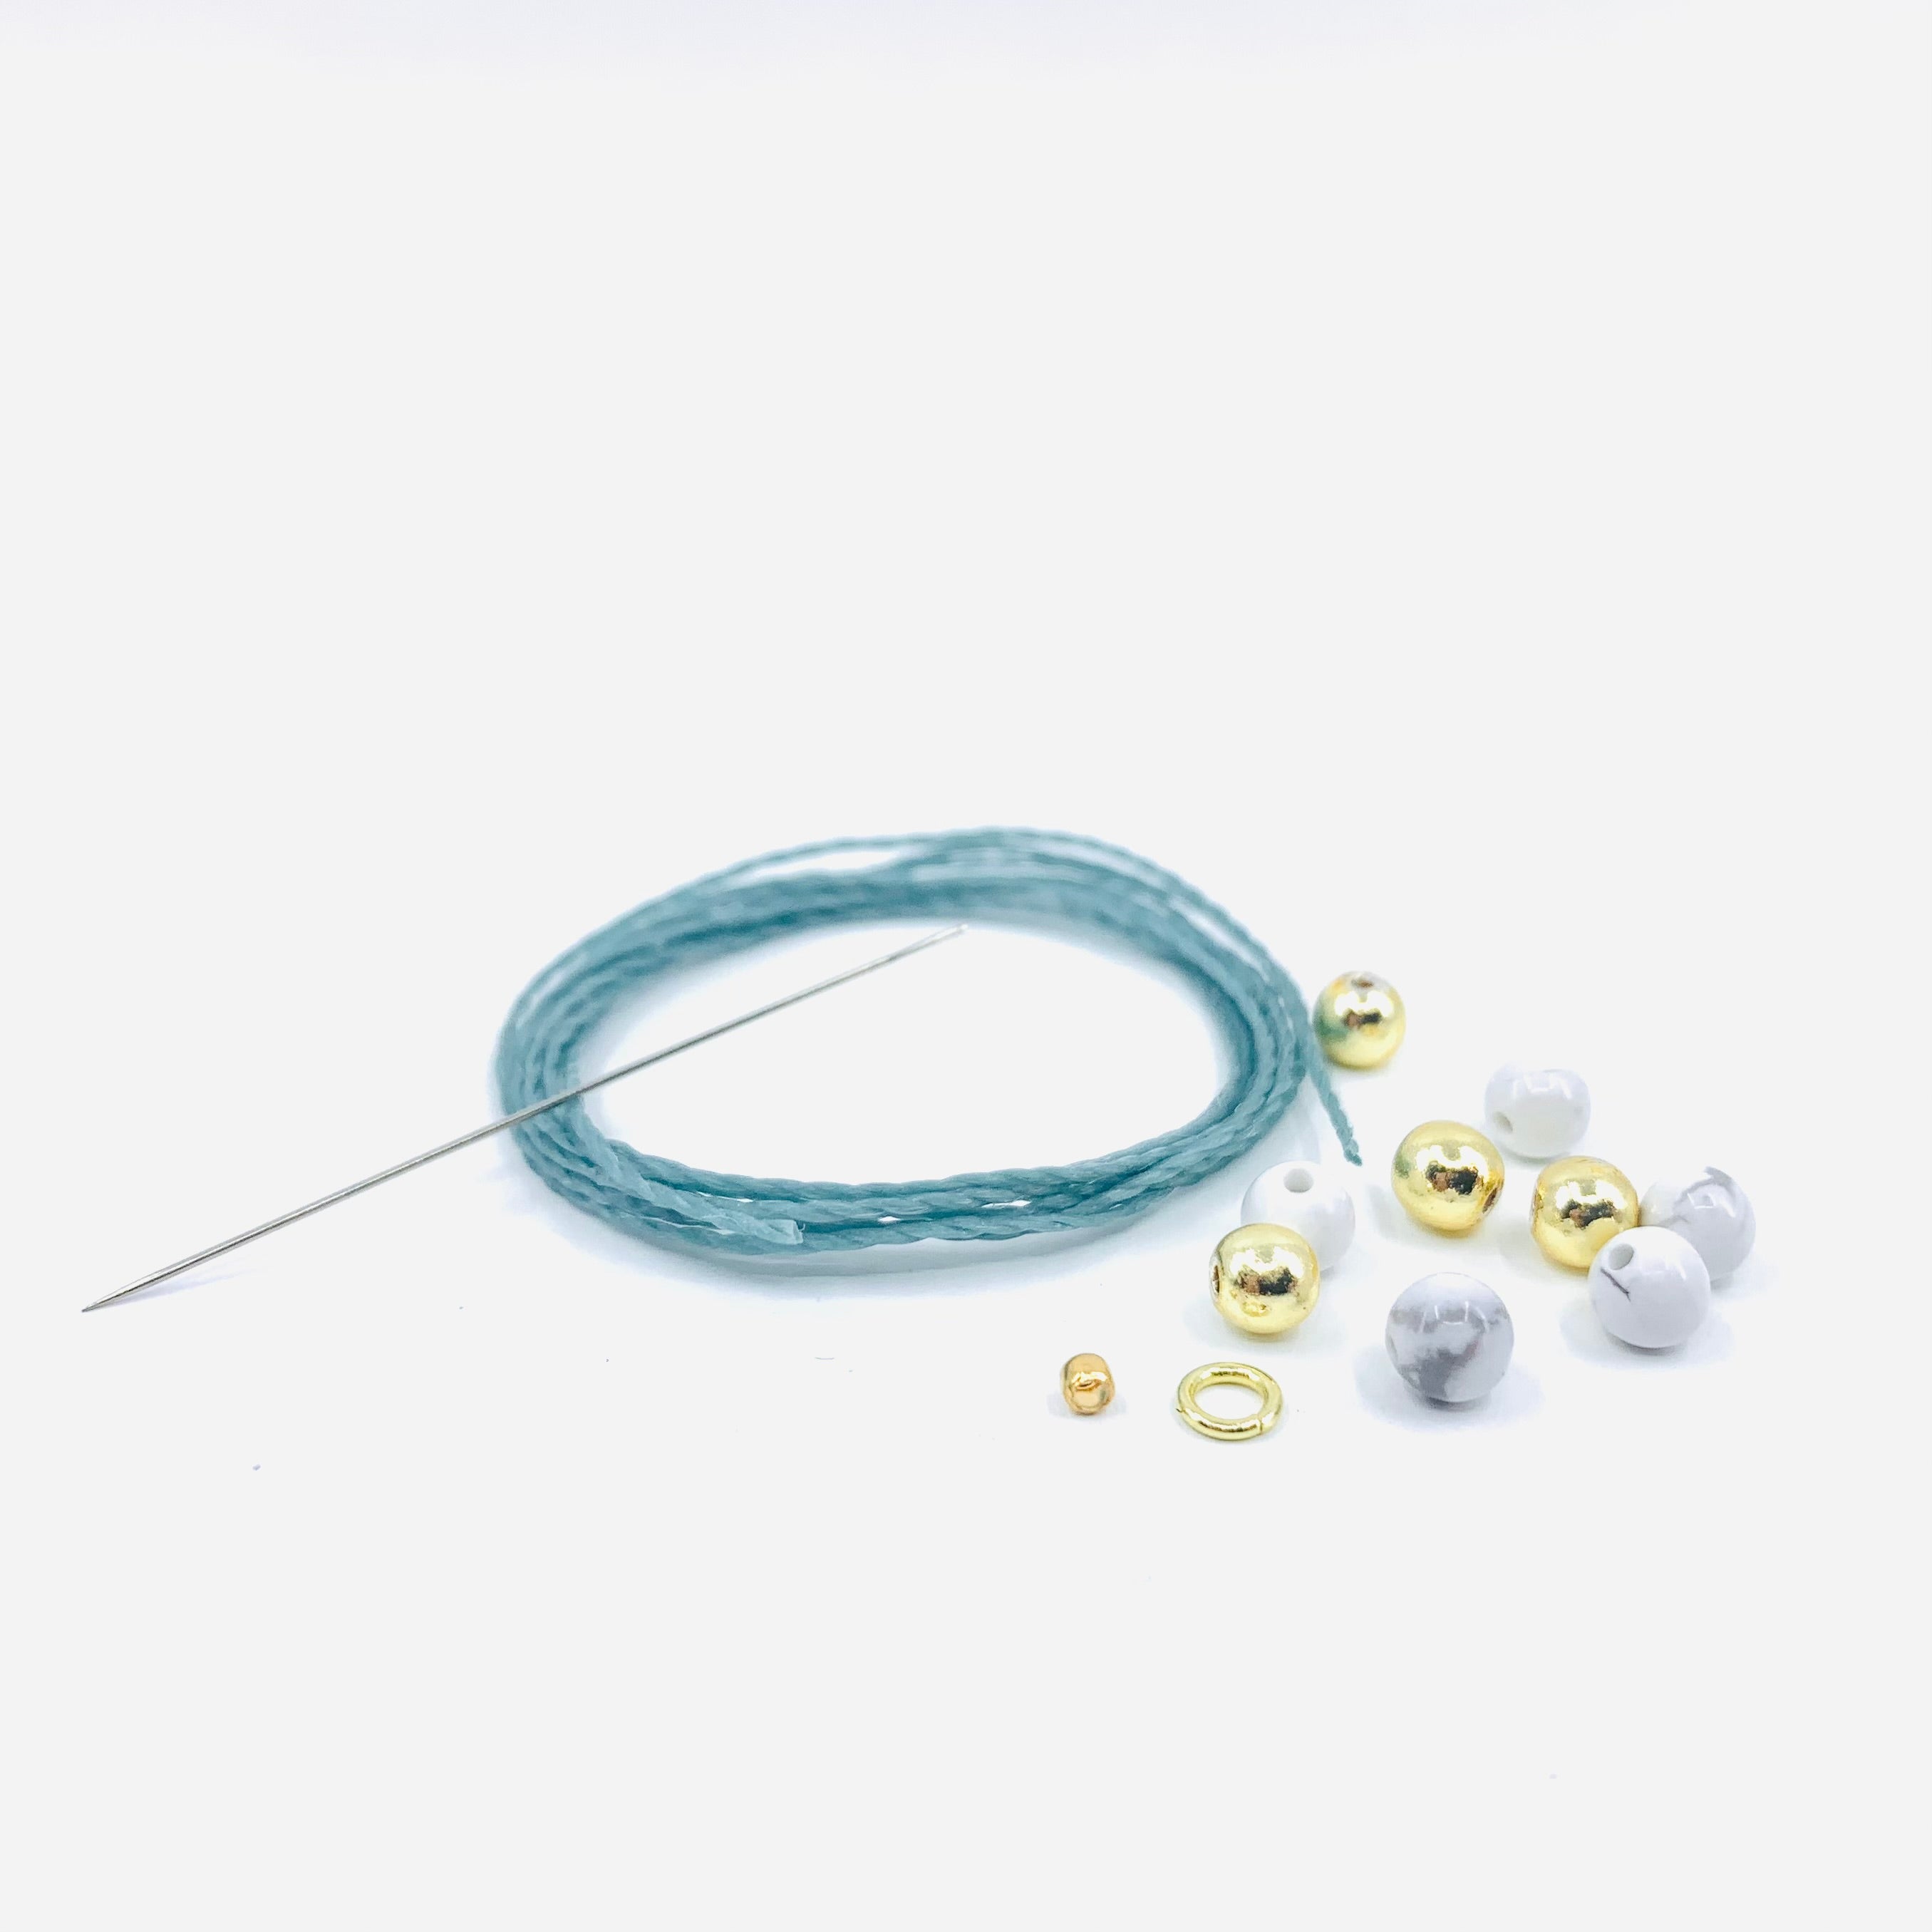 Ourtroness Morse Code Bracelet Making Kit, Includes Stainless Steel Round Spacer Beads, Long Tube Beads, Morse Code Decoding Card and Waxed Cord for